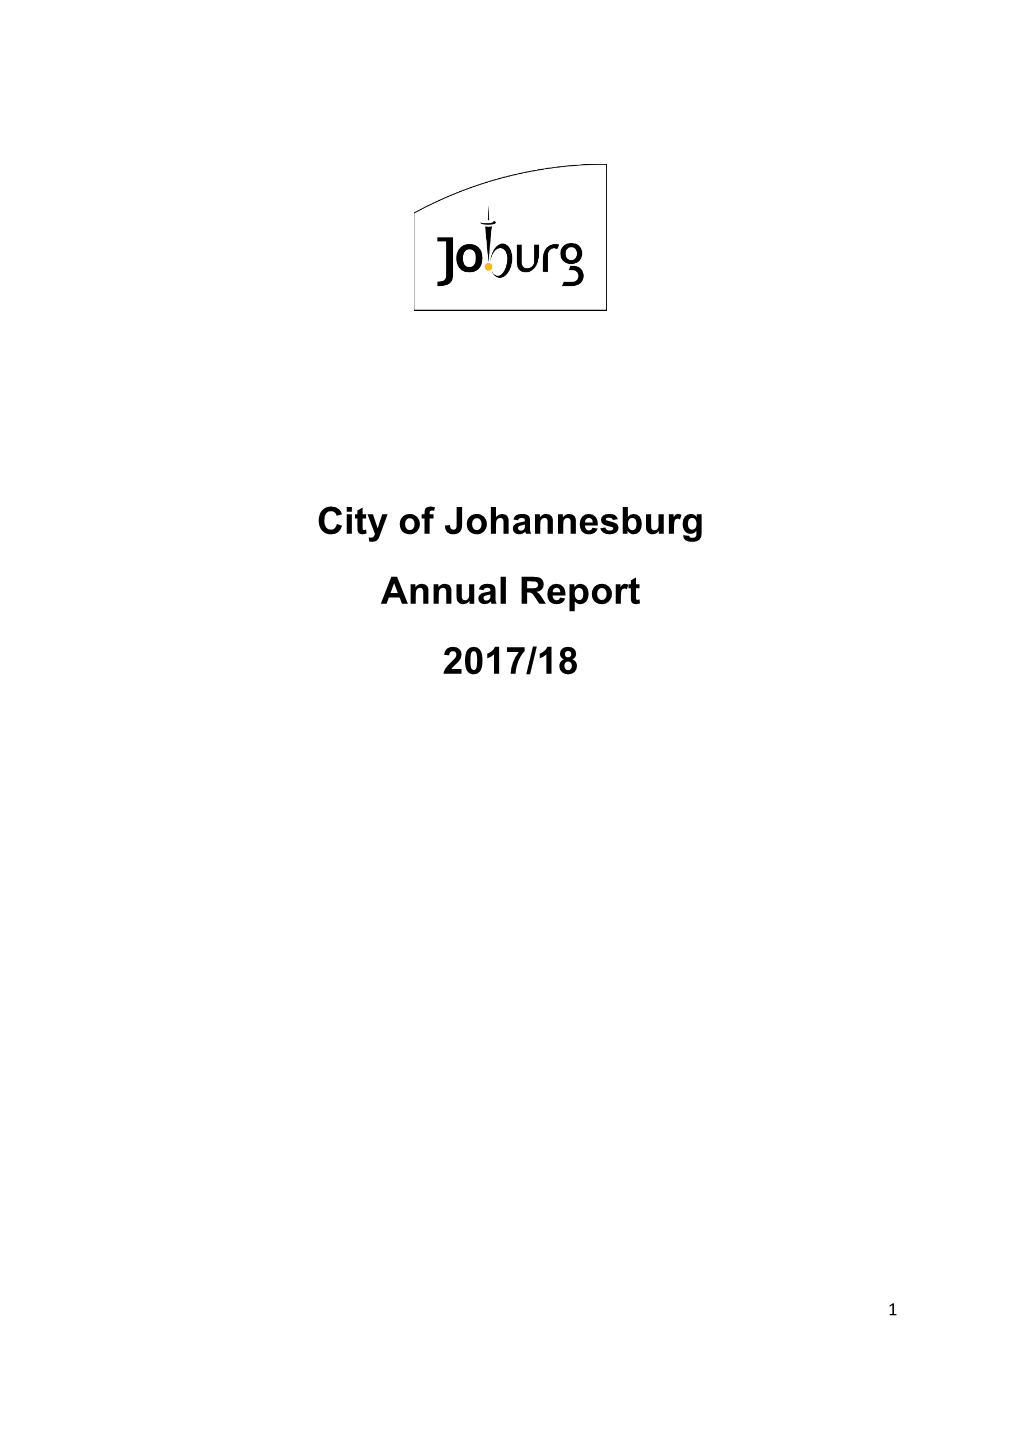 2017/18 Annual Report Provides Detailed Information on the City’S Performance